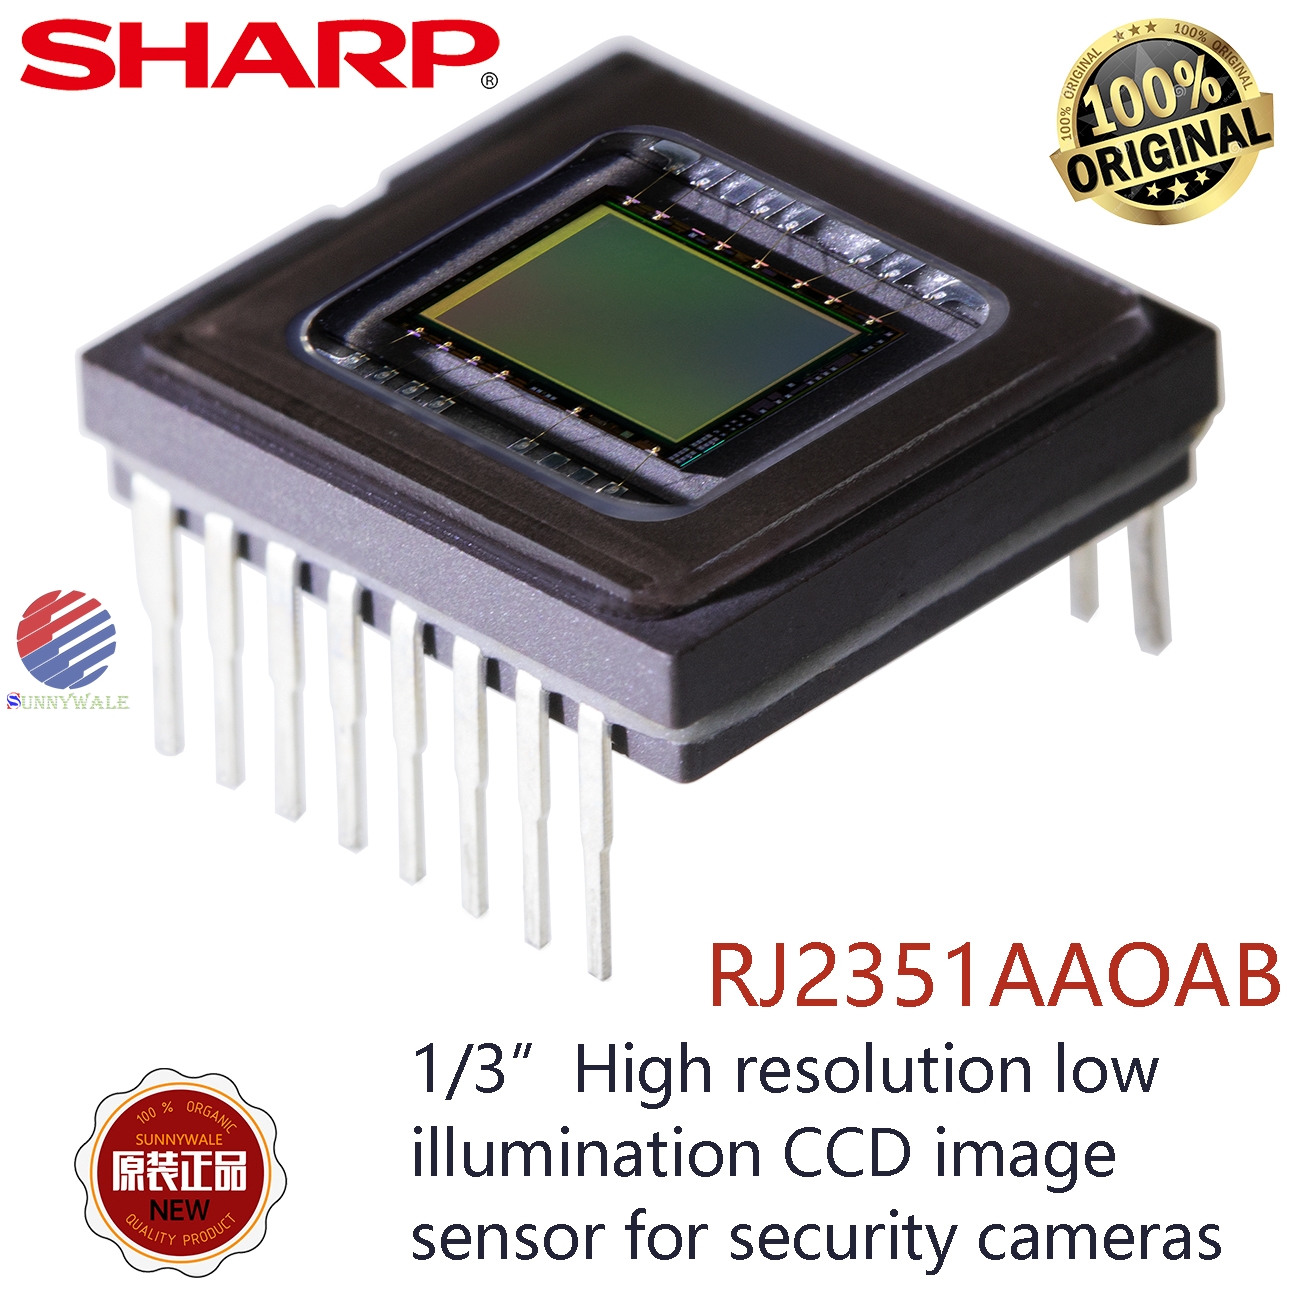 RJ2351AAOAB, RJ2351AA0AB, SHARP 1/3 CCD, analog output HD camera CCD, high resolution low illumination CCD image sensor, for security cameras